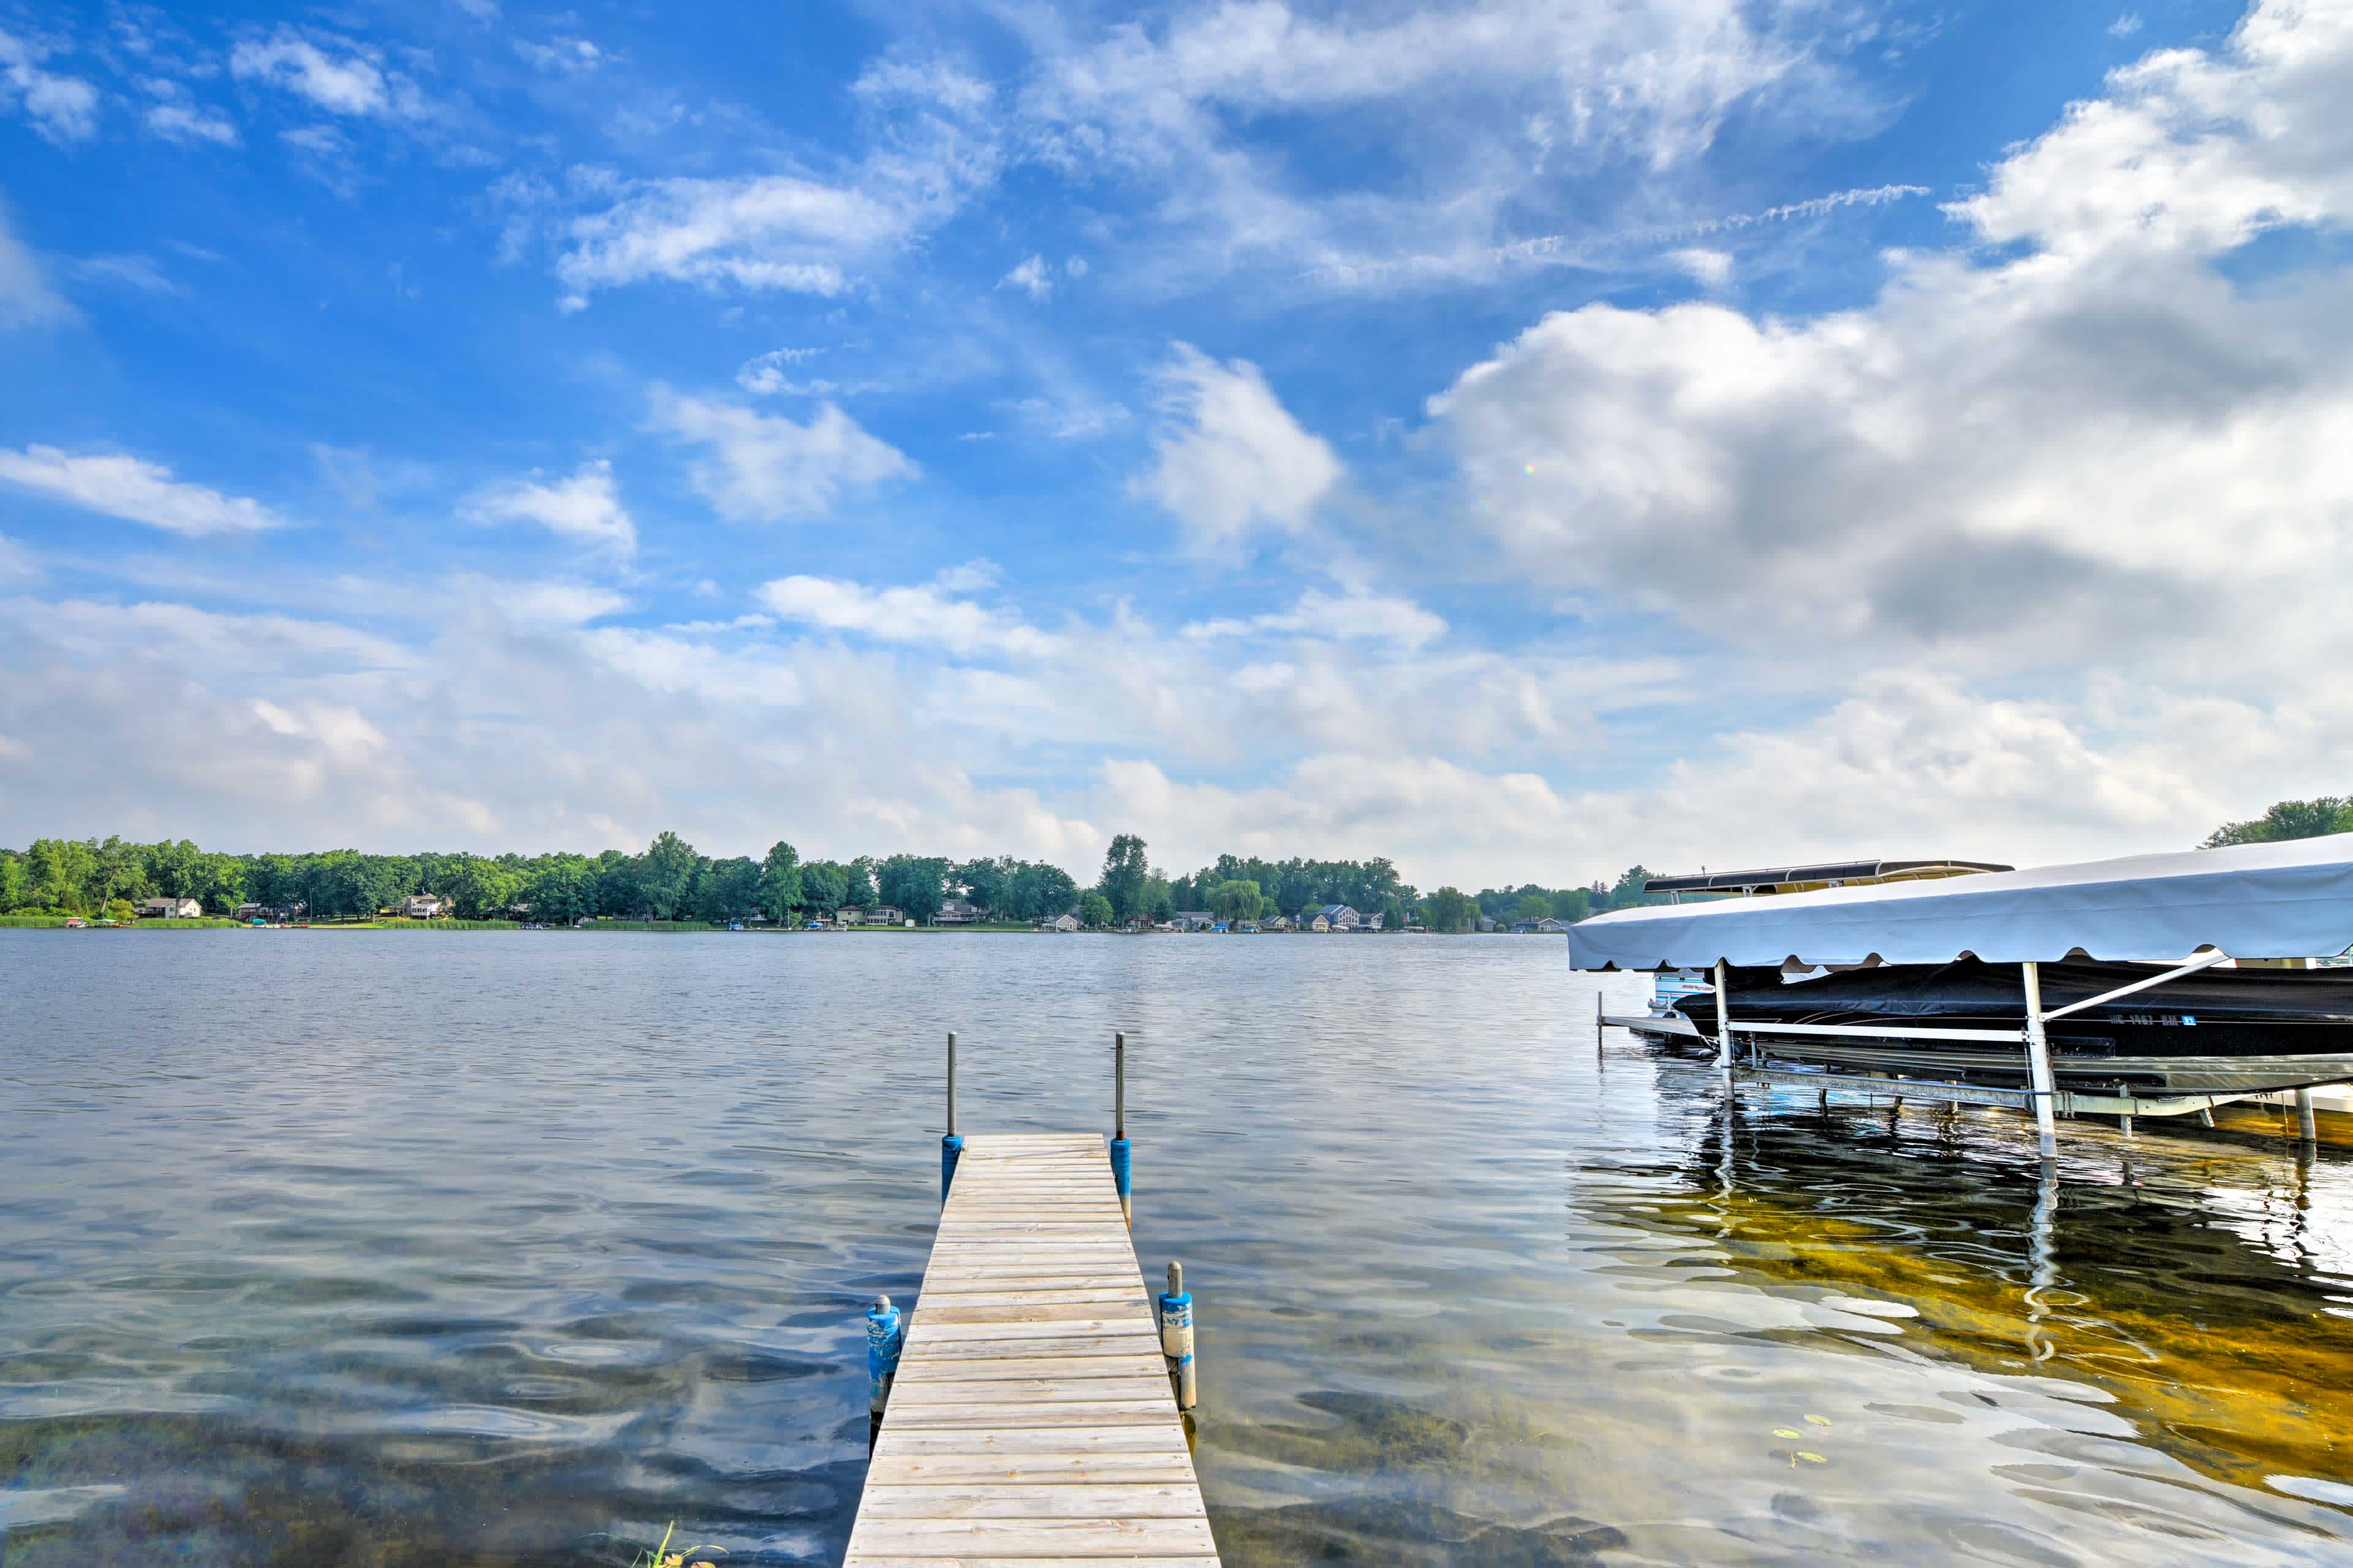 View from a wooden dock overlooking an inland lake in Jackson, MI with a boat on a lift on the right, and blue skies overhead